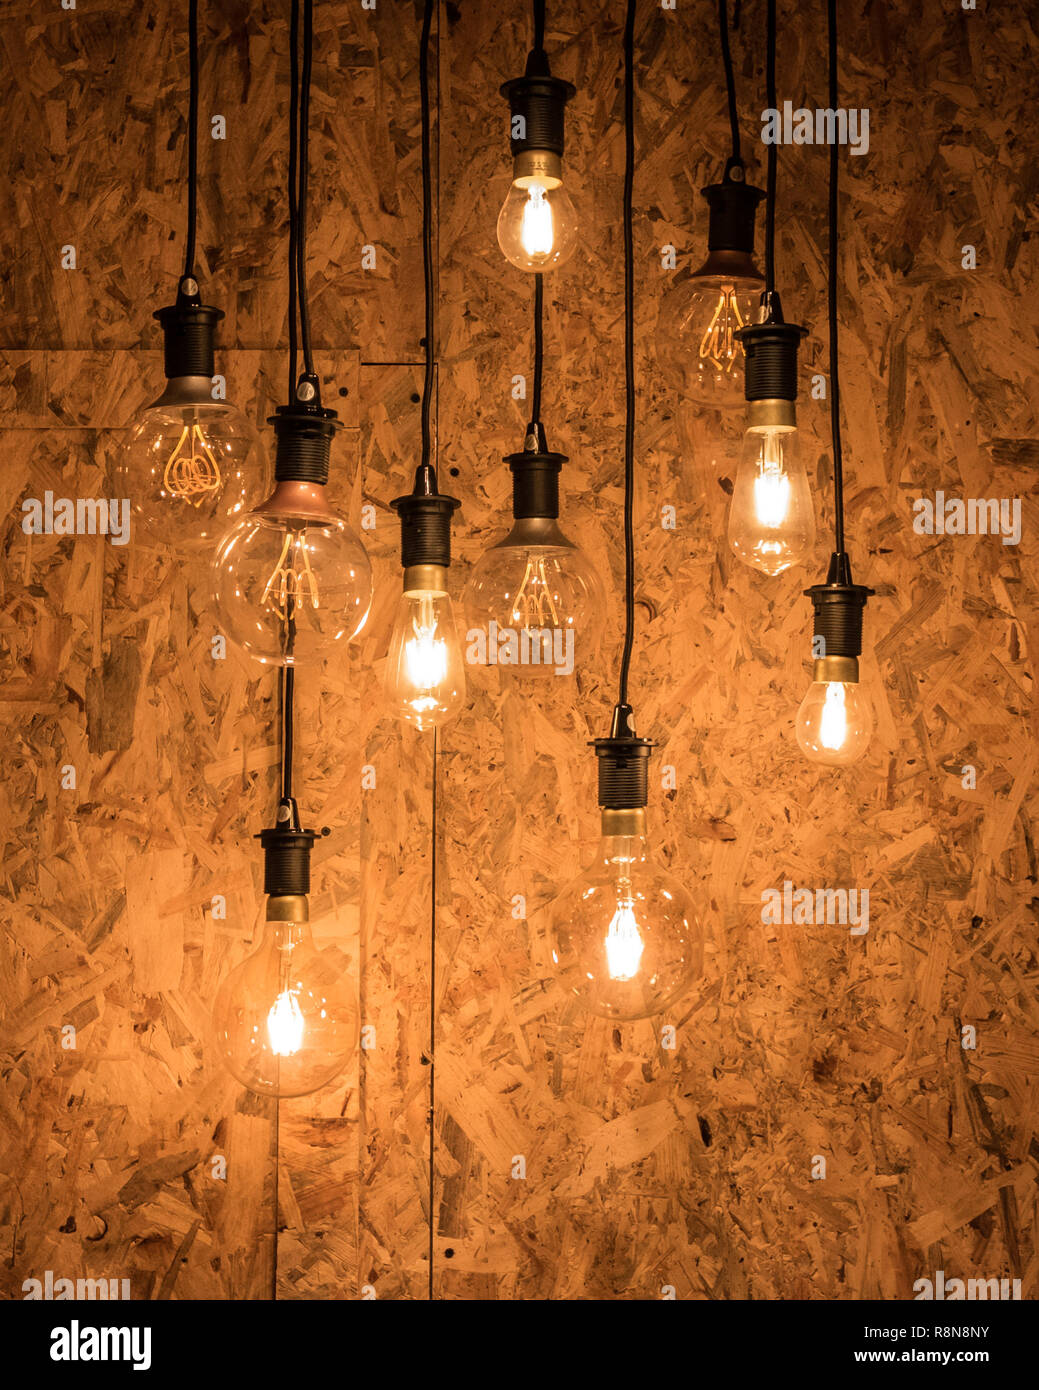 Multiple light bulbs hanging from ceiling against a wooden background Stock  Photo - Alamy